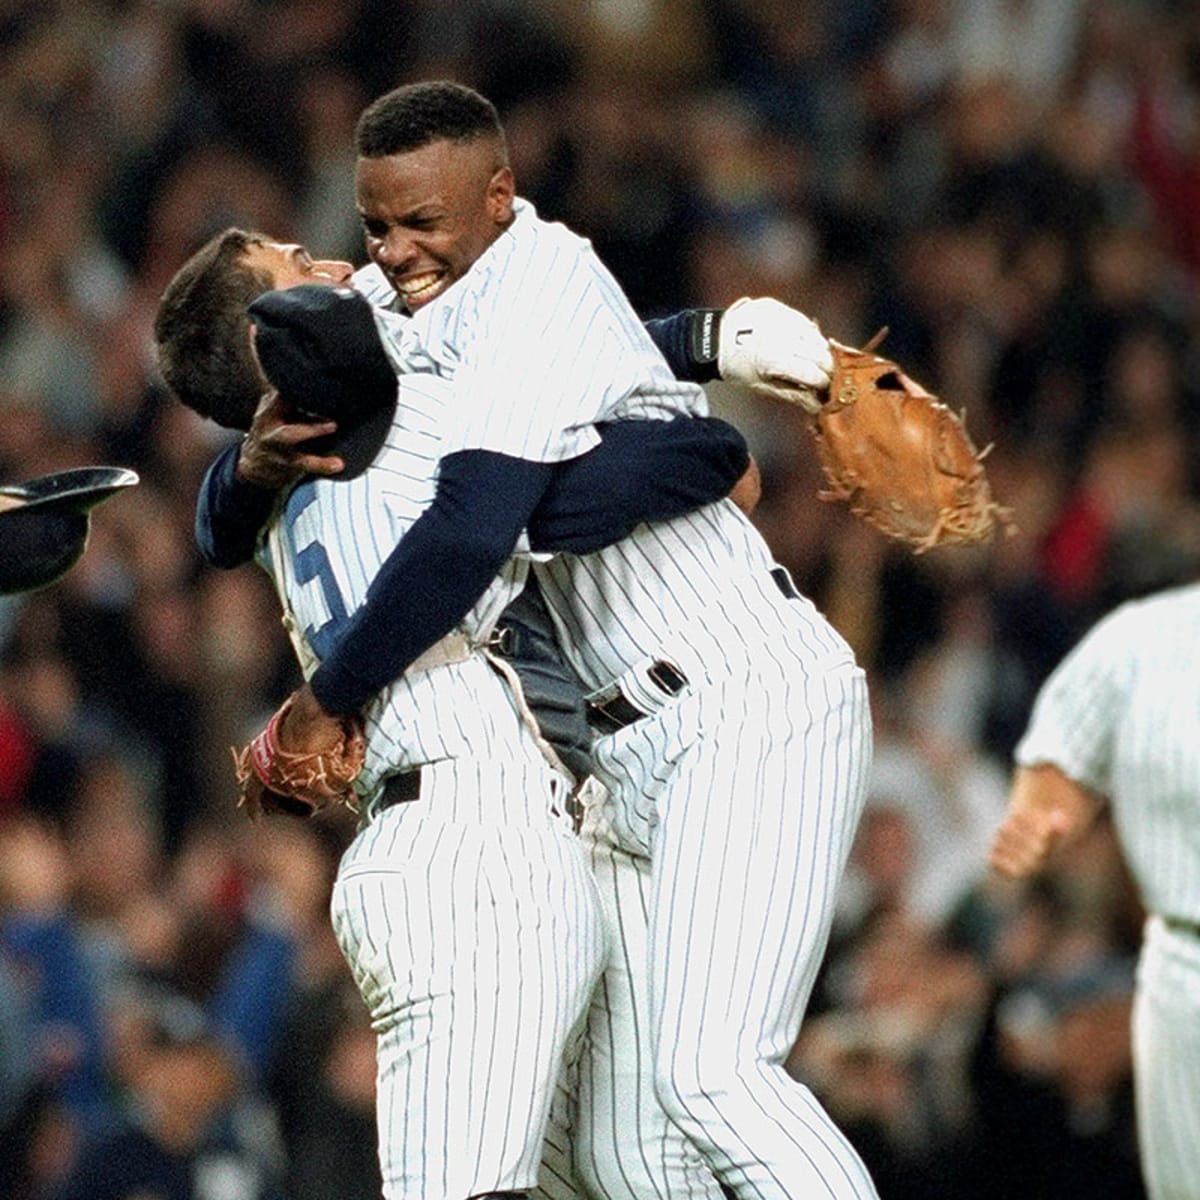 There's no Giants game tonight, so watch Dwight Gooden dominate a